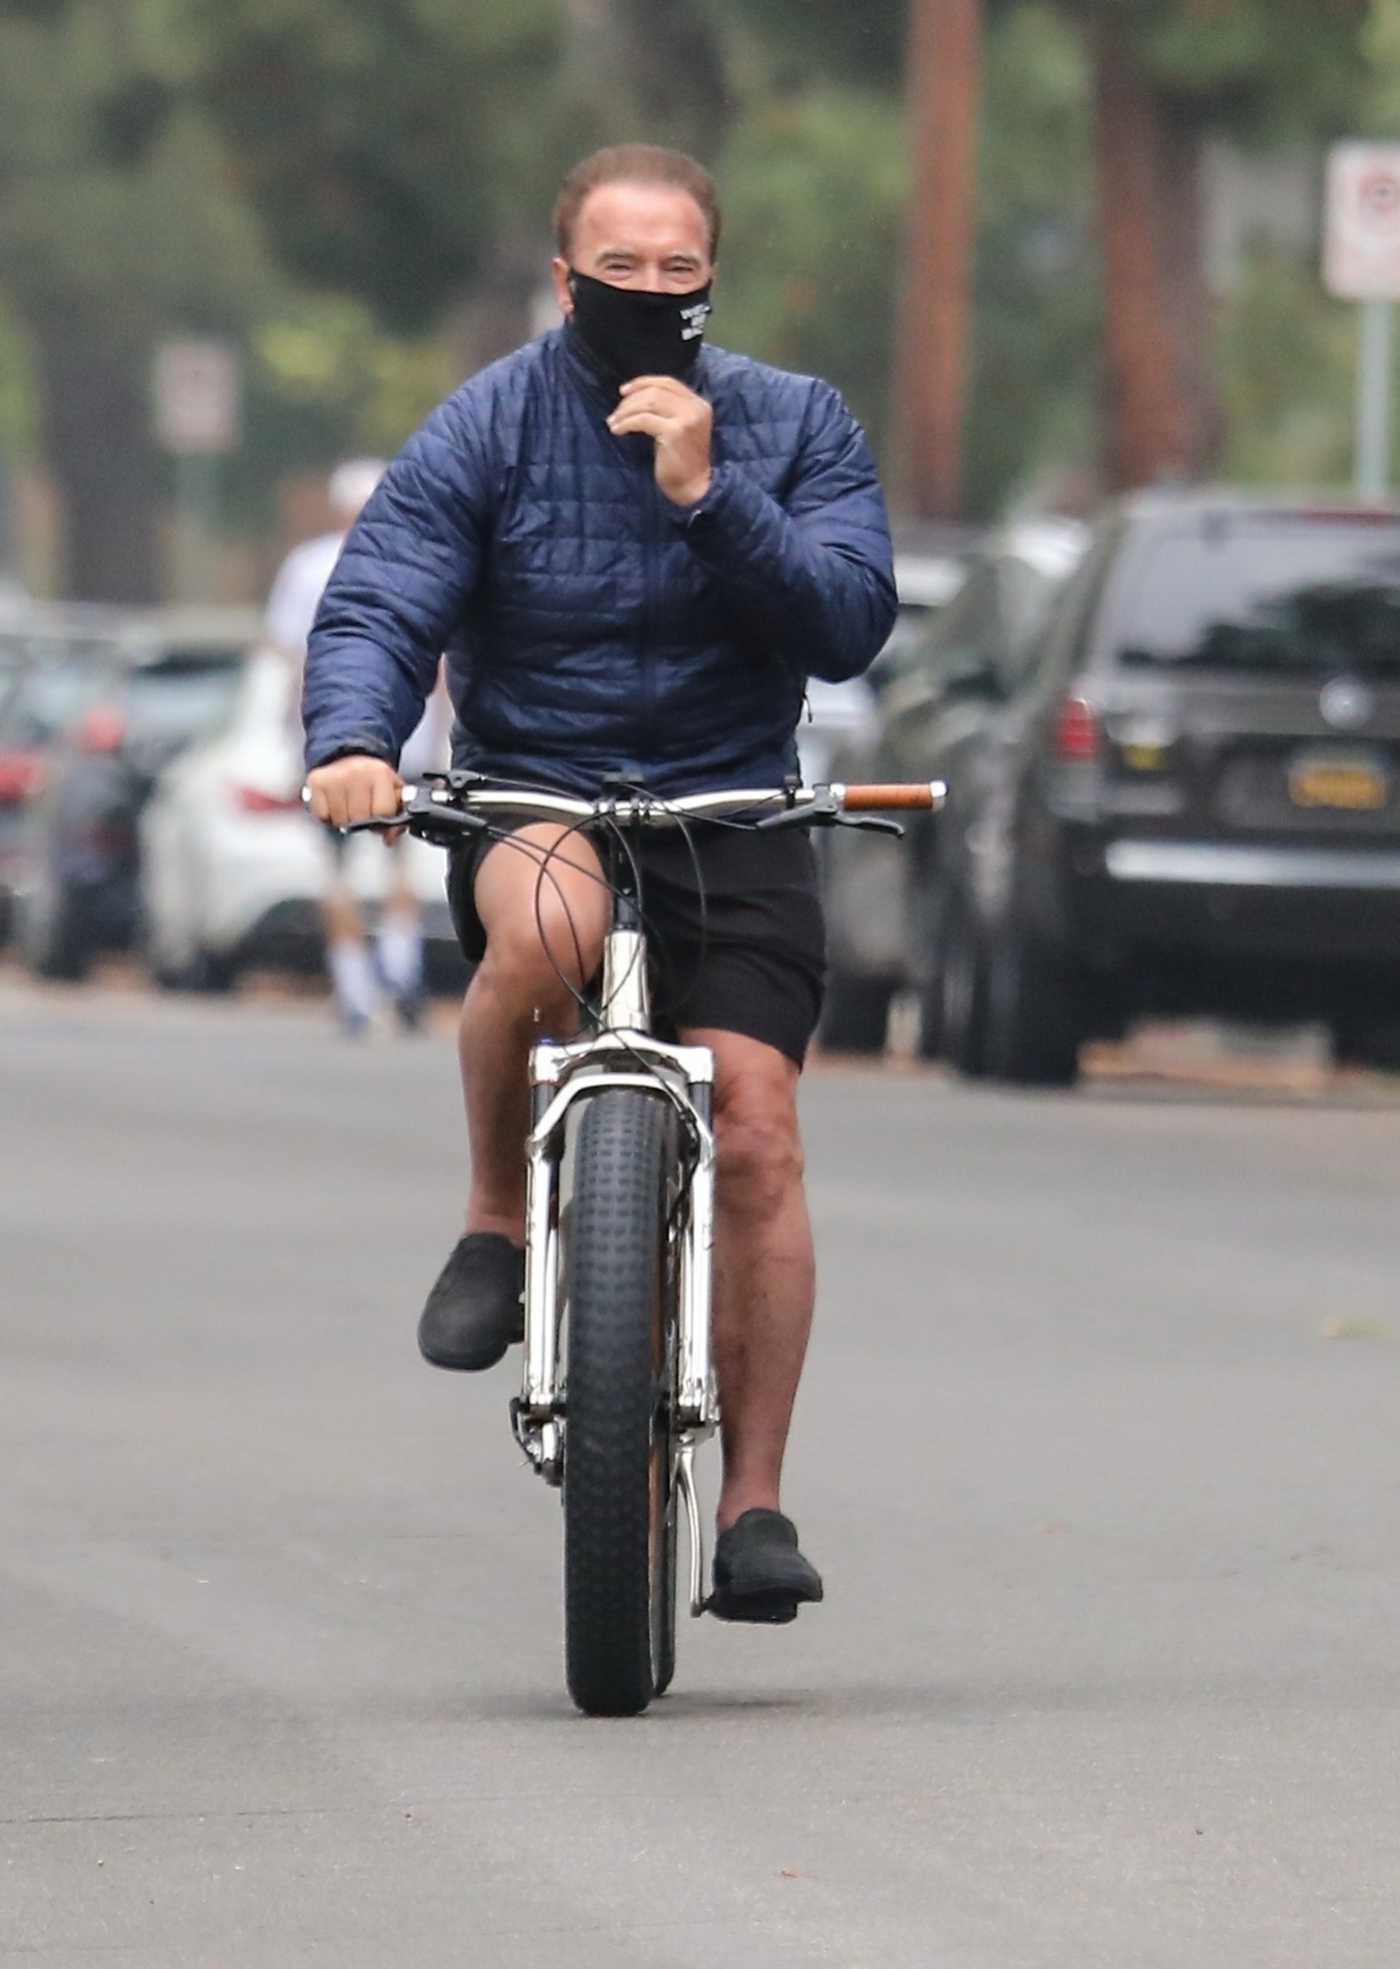 Arnold Schwarzenegger in a Black Face Mask Does a Bike Ride Out with His Daughter Christina Schwarzenegger in Santa Monica 04/30/2020